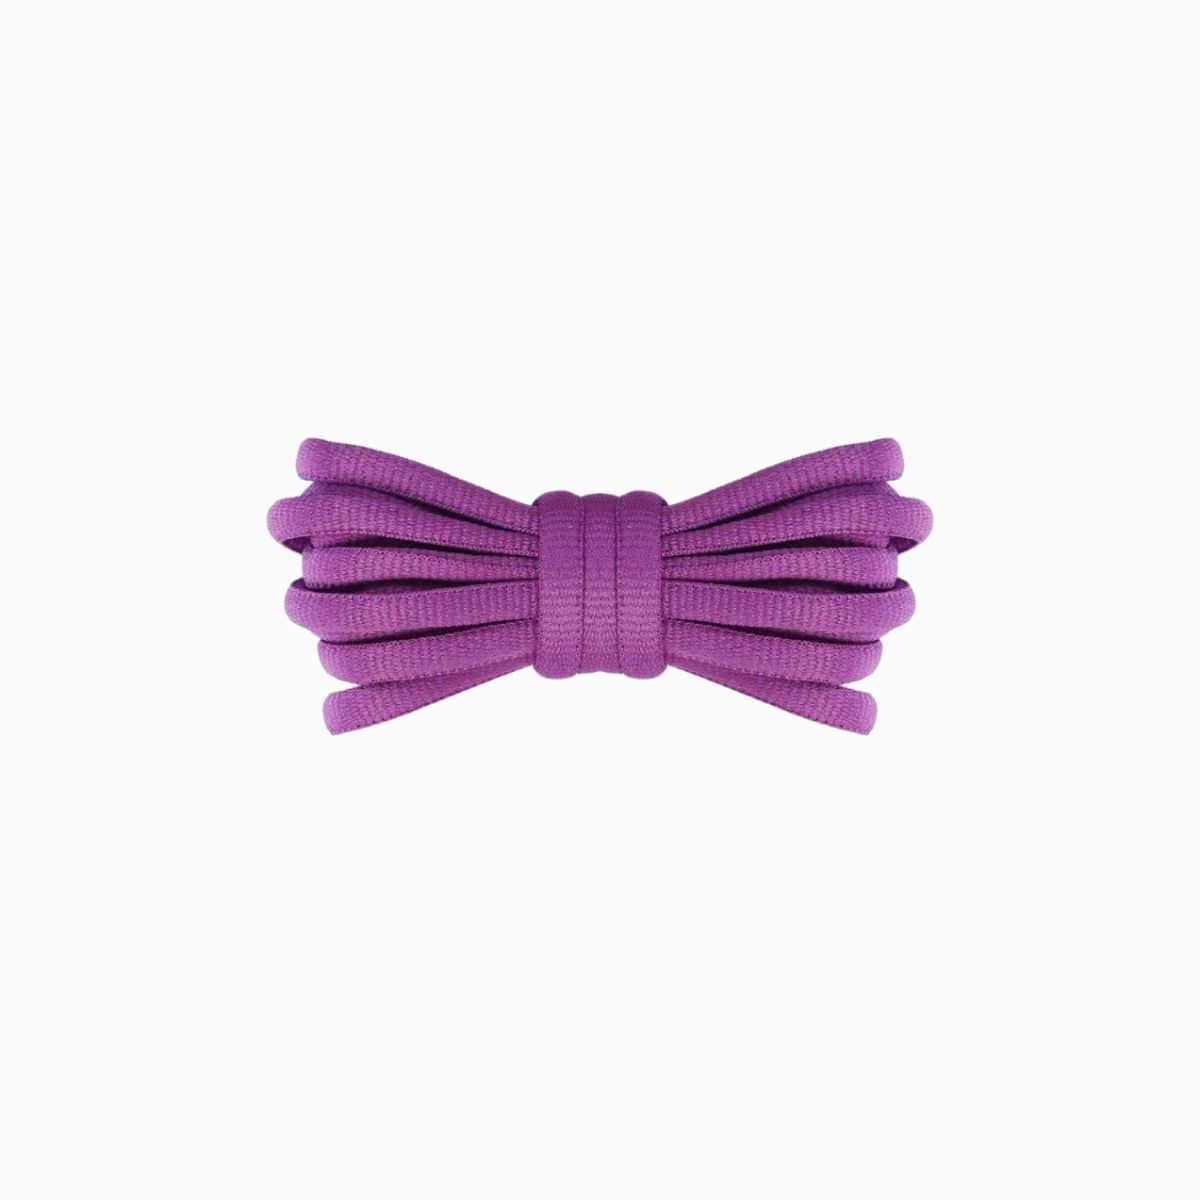 Sunset Purple Replacement Adidas Shoe Laces for Adidas Spezial Sneakers by Kicks Shoelaces